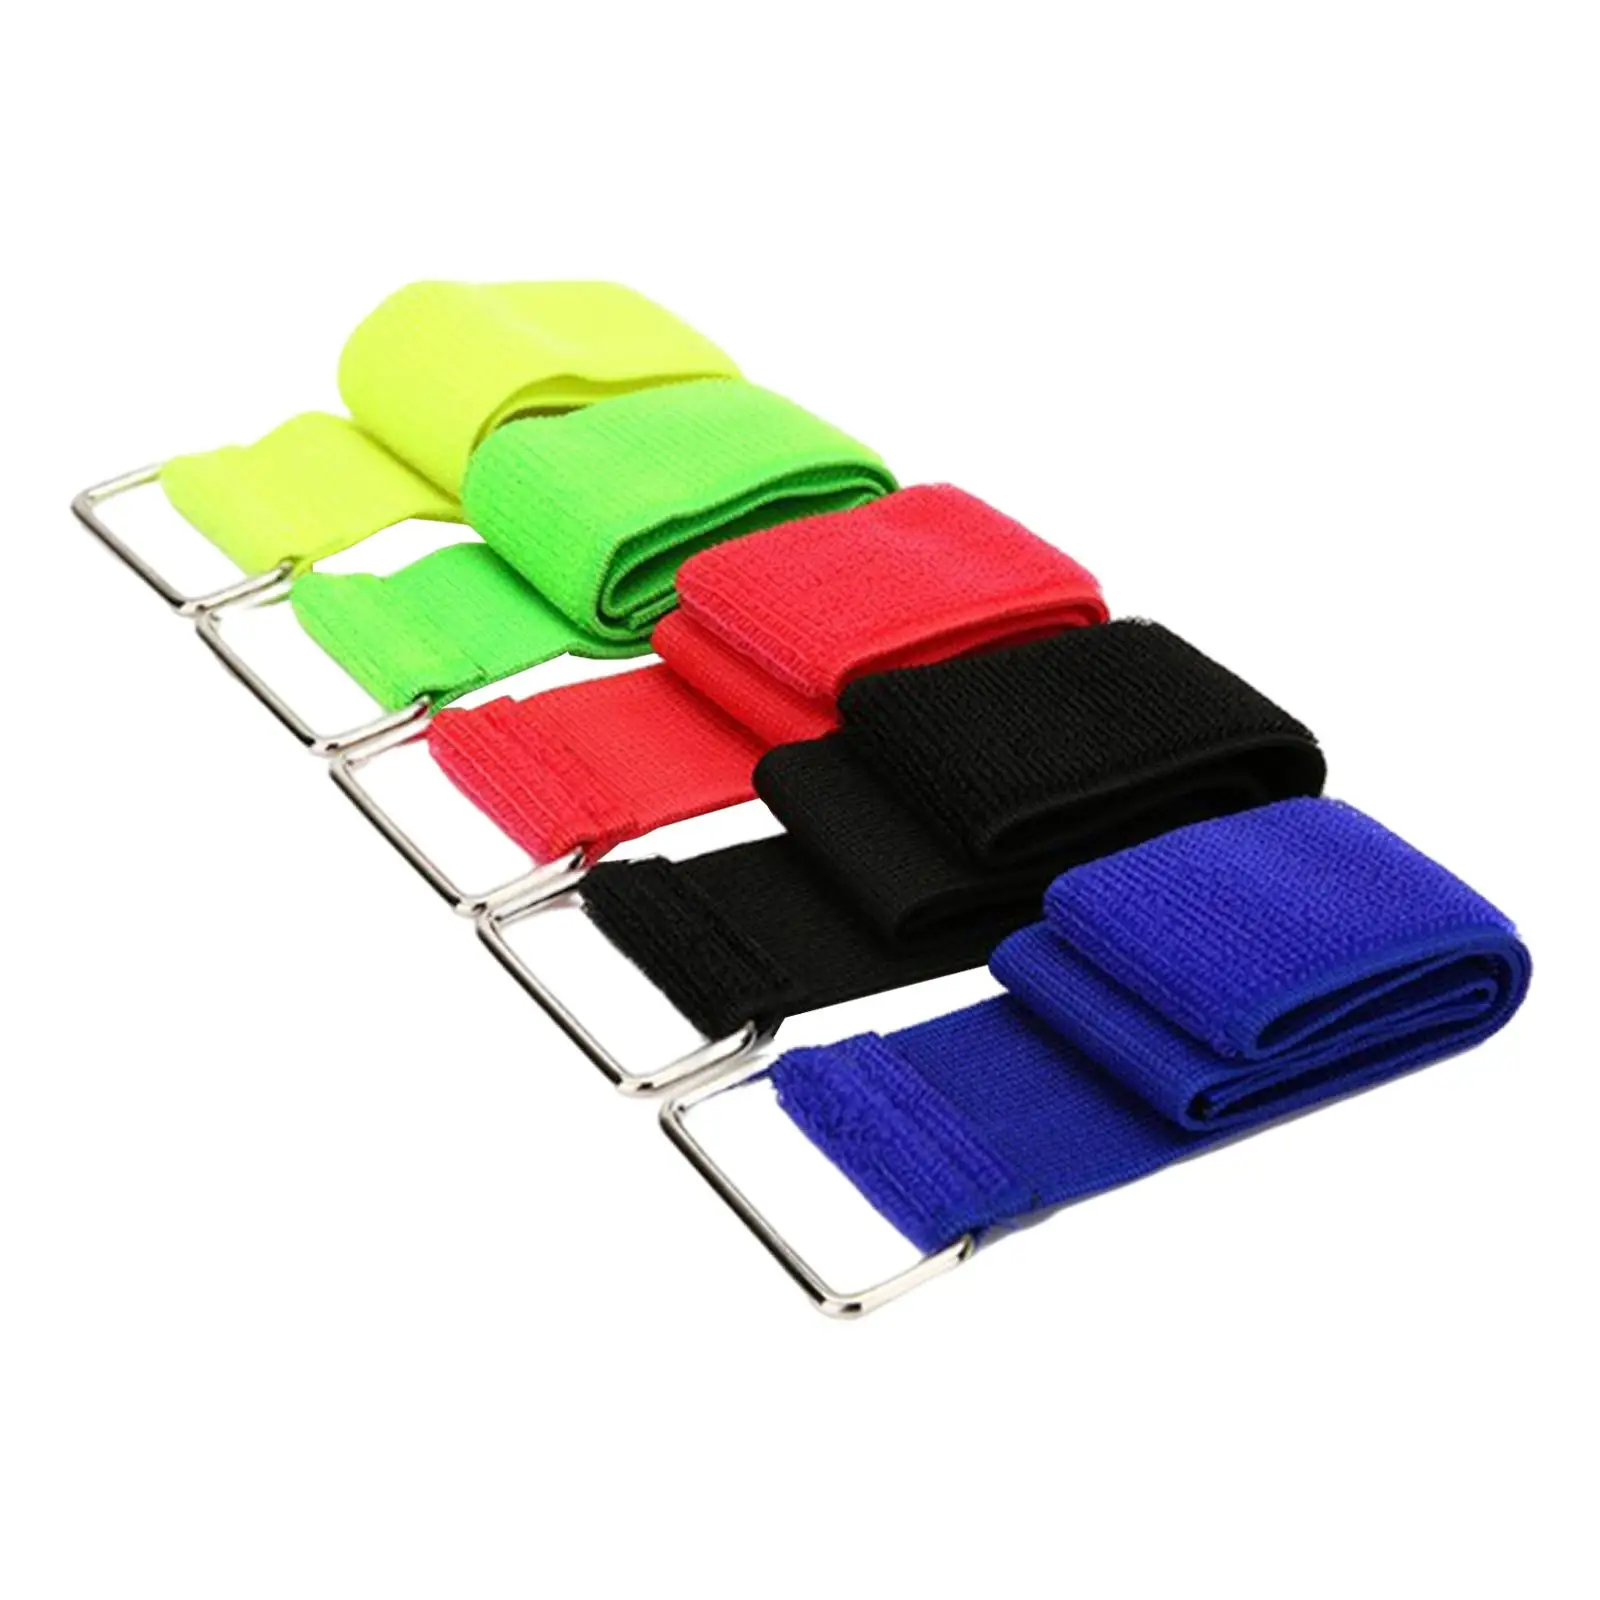 5 Pieces Firm Relay Race Game Bands Birthday Party Games Christmas Game Carnival Relay Race Game Race Bands for Adult Family